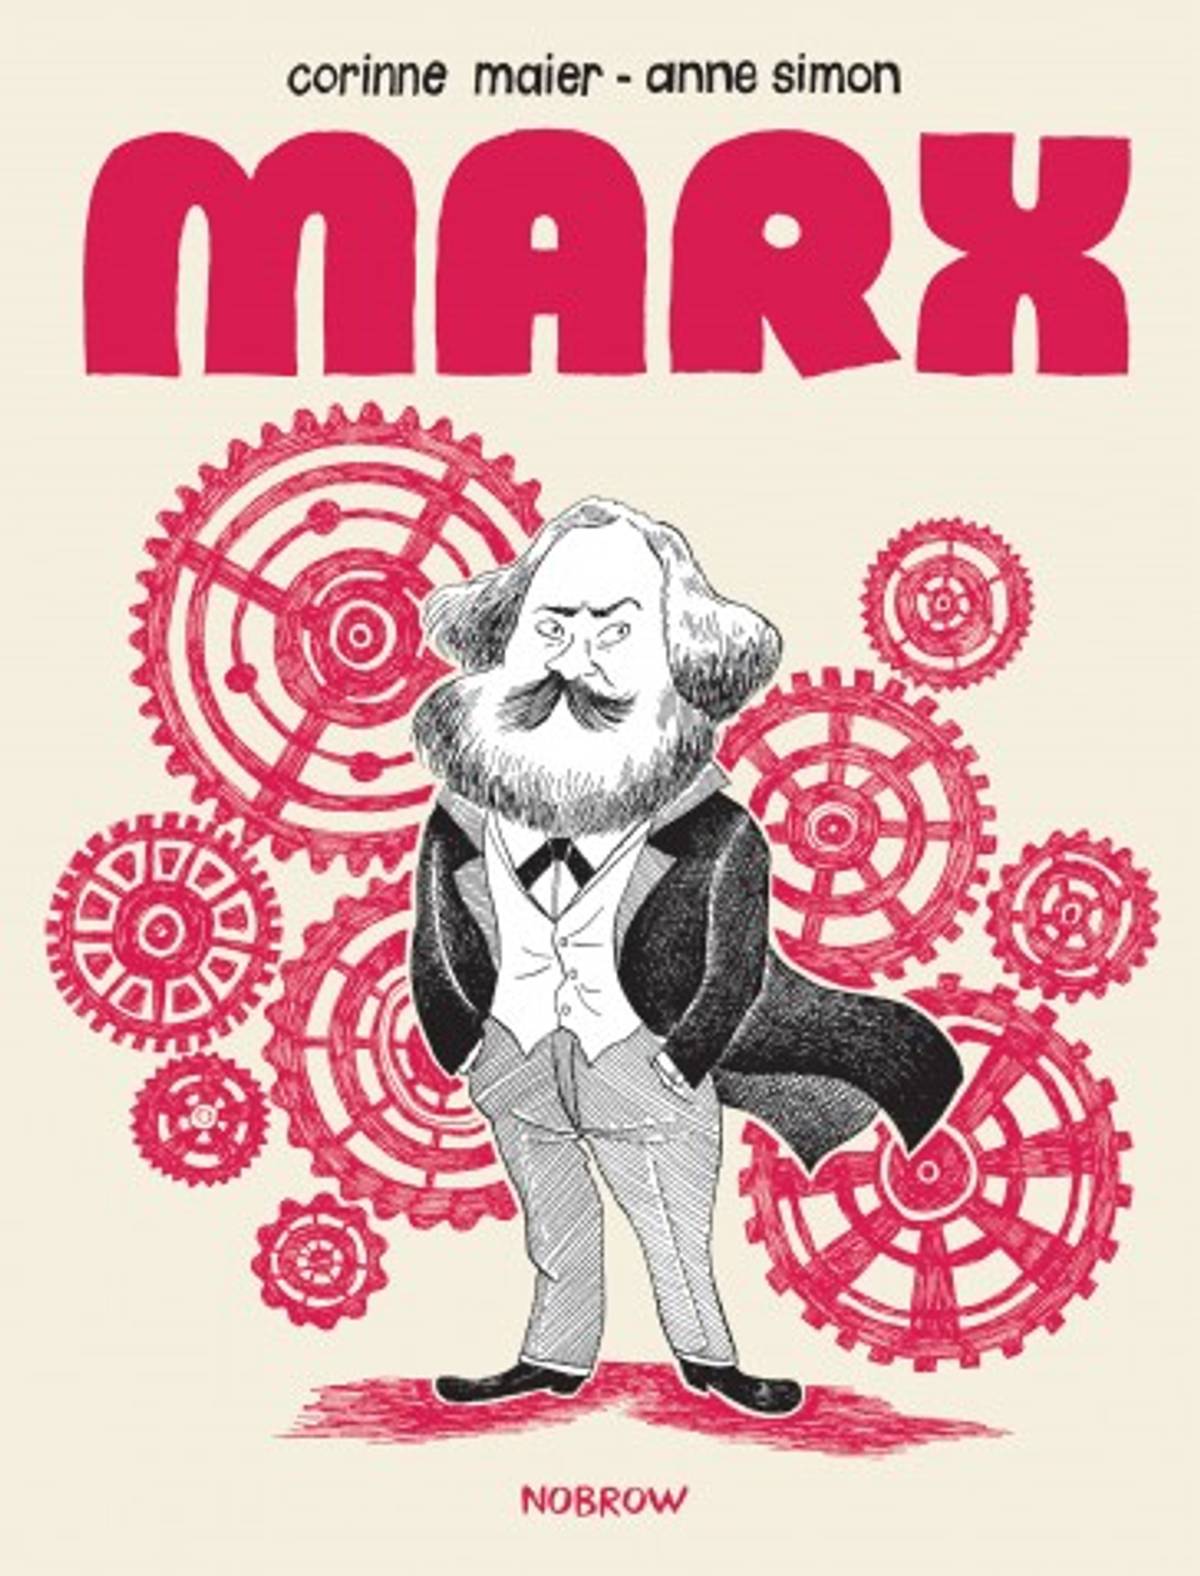 The cover of ‘Marx’ by Corinne Maier, illustrated by Anne Simon. (Art by Anne Simon)